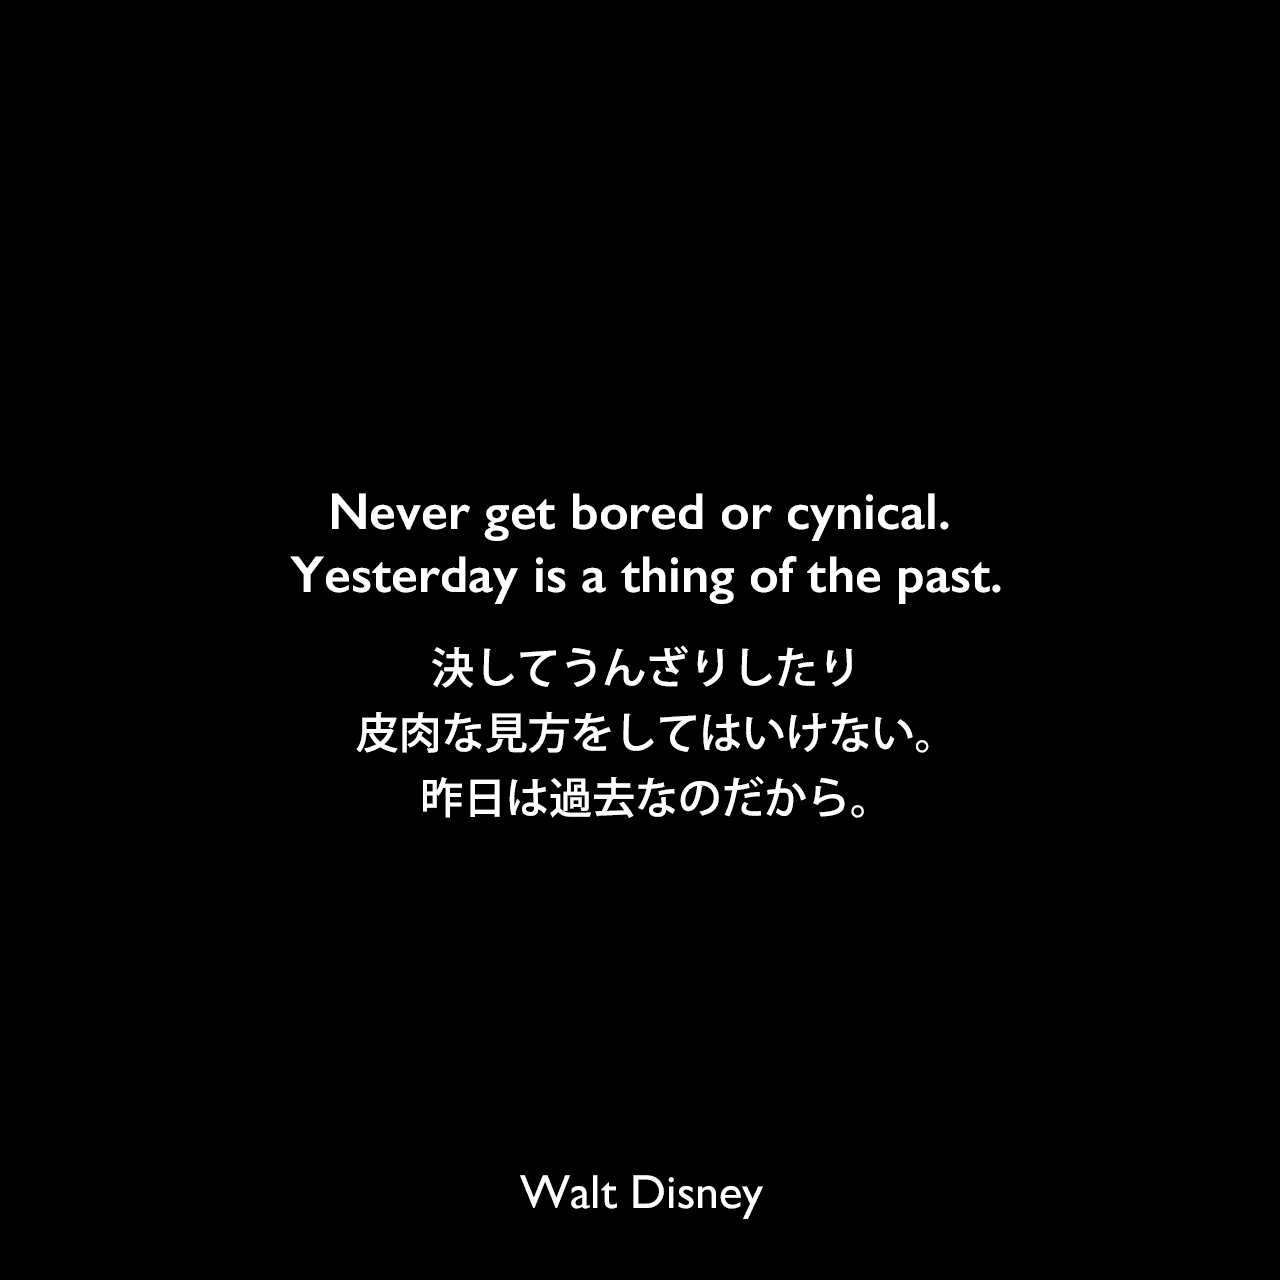 Never get bored or cynical. Yesterday is a thing of the past.決してうんざりしたり、皮肉な見方をしてはいけない。昨日は過去なのだから。